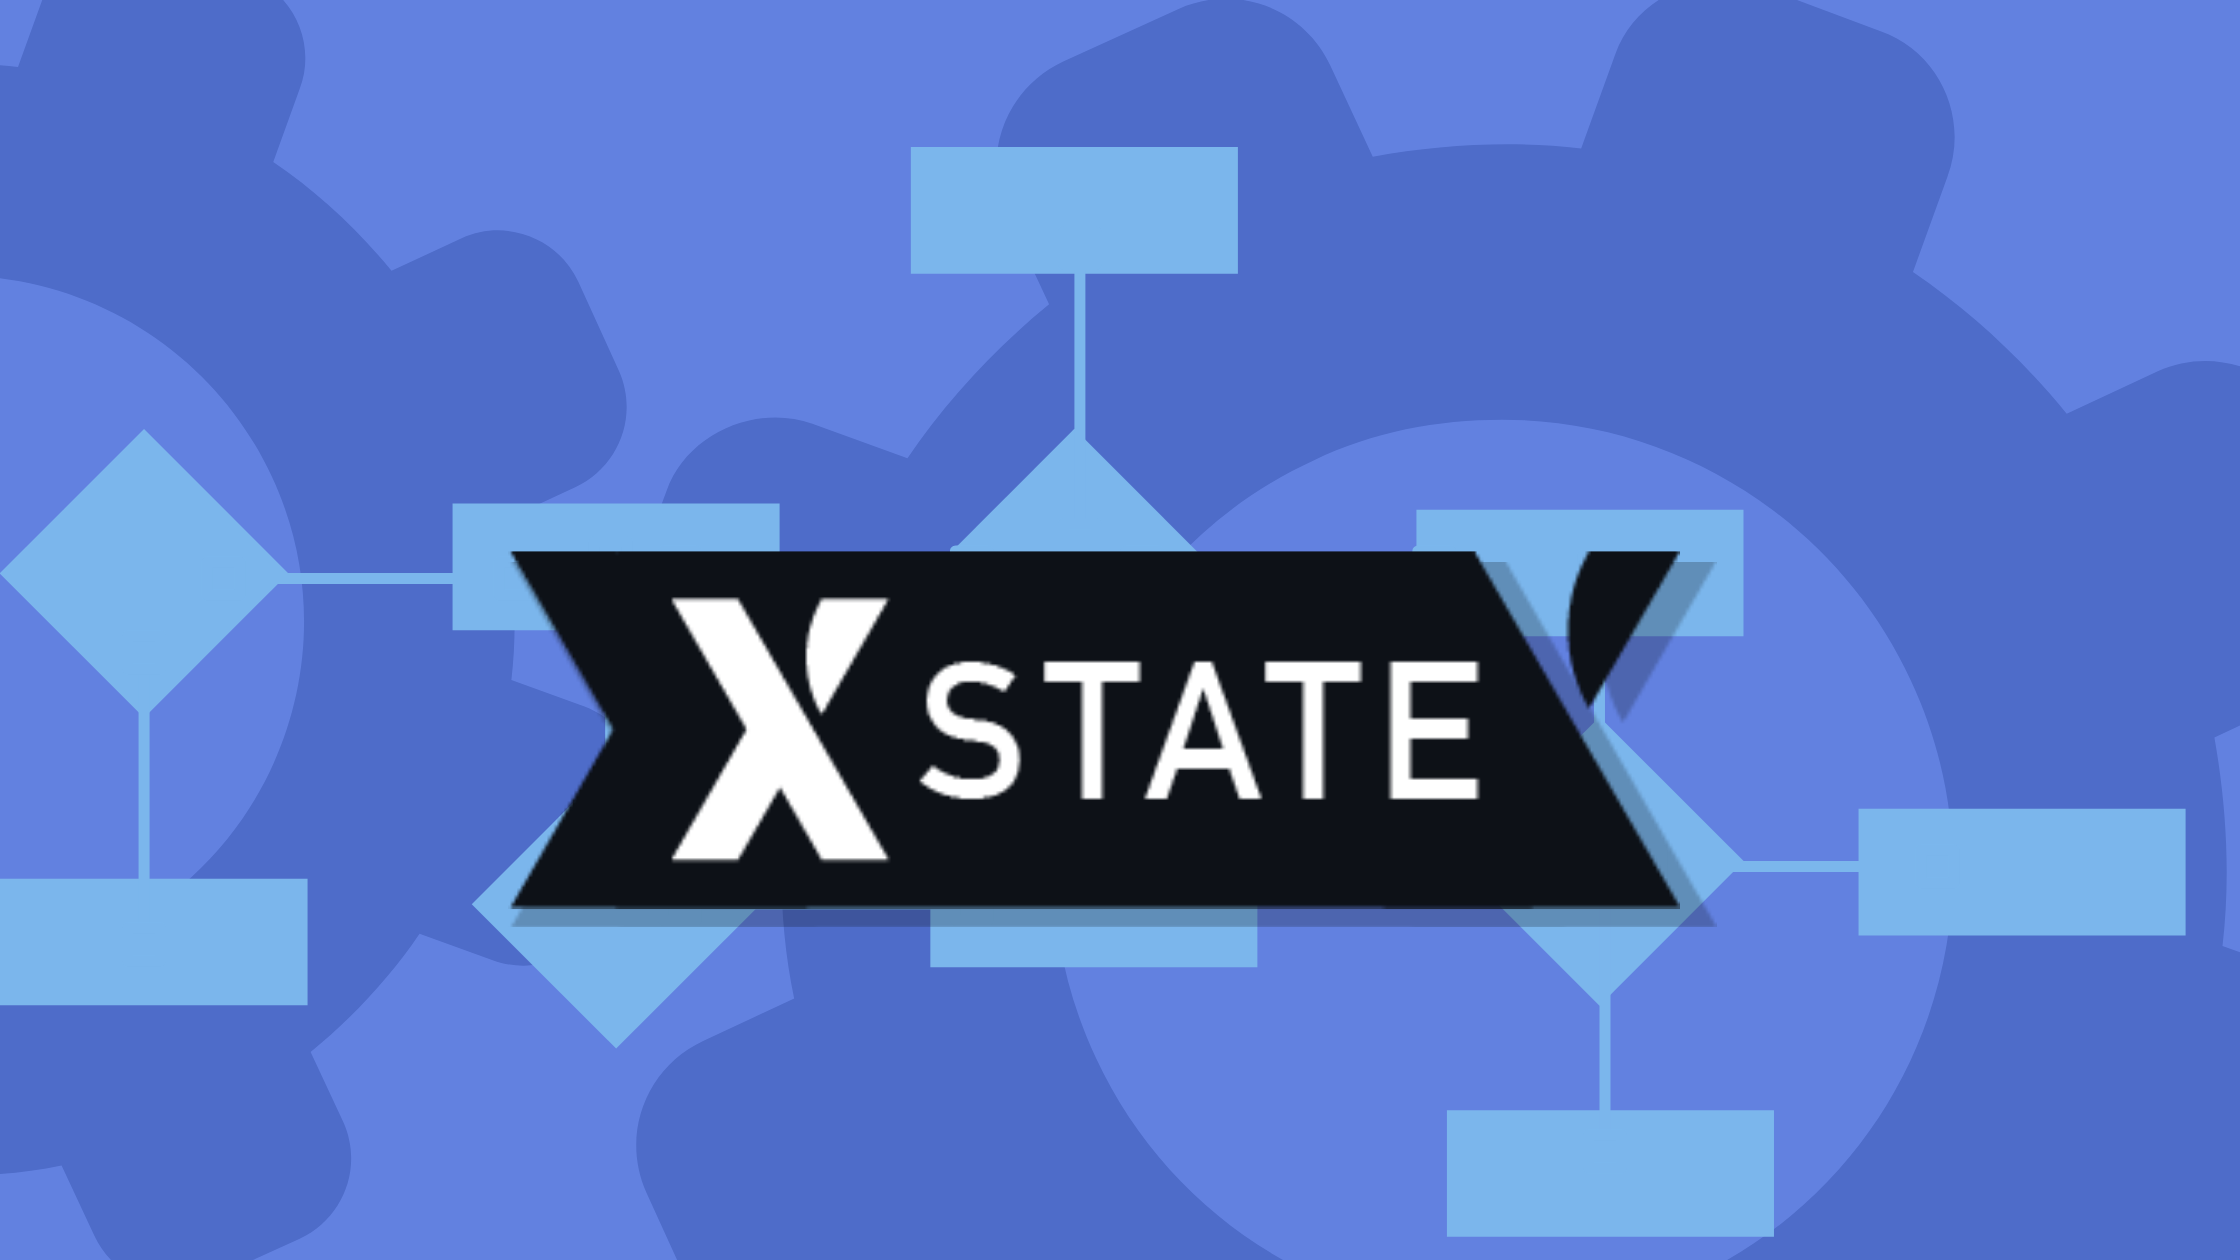 XState: The Solution to All Your App State Problems